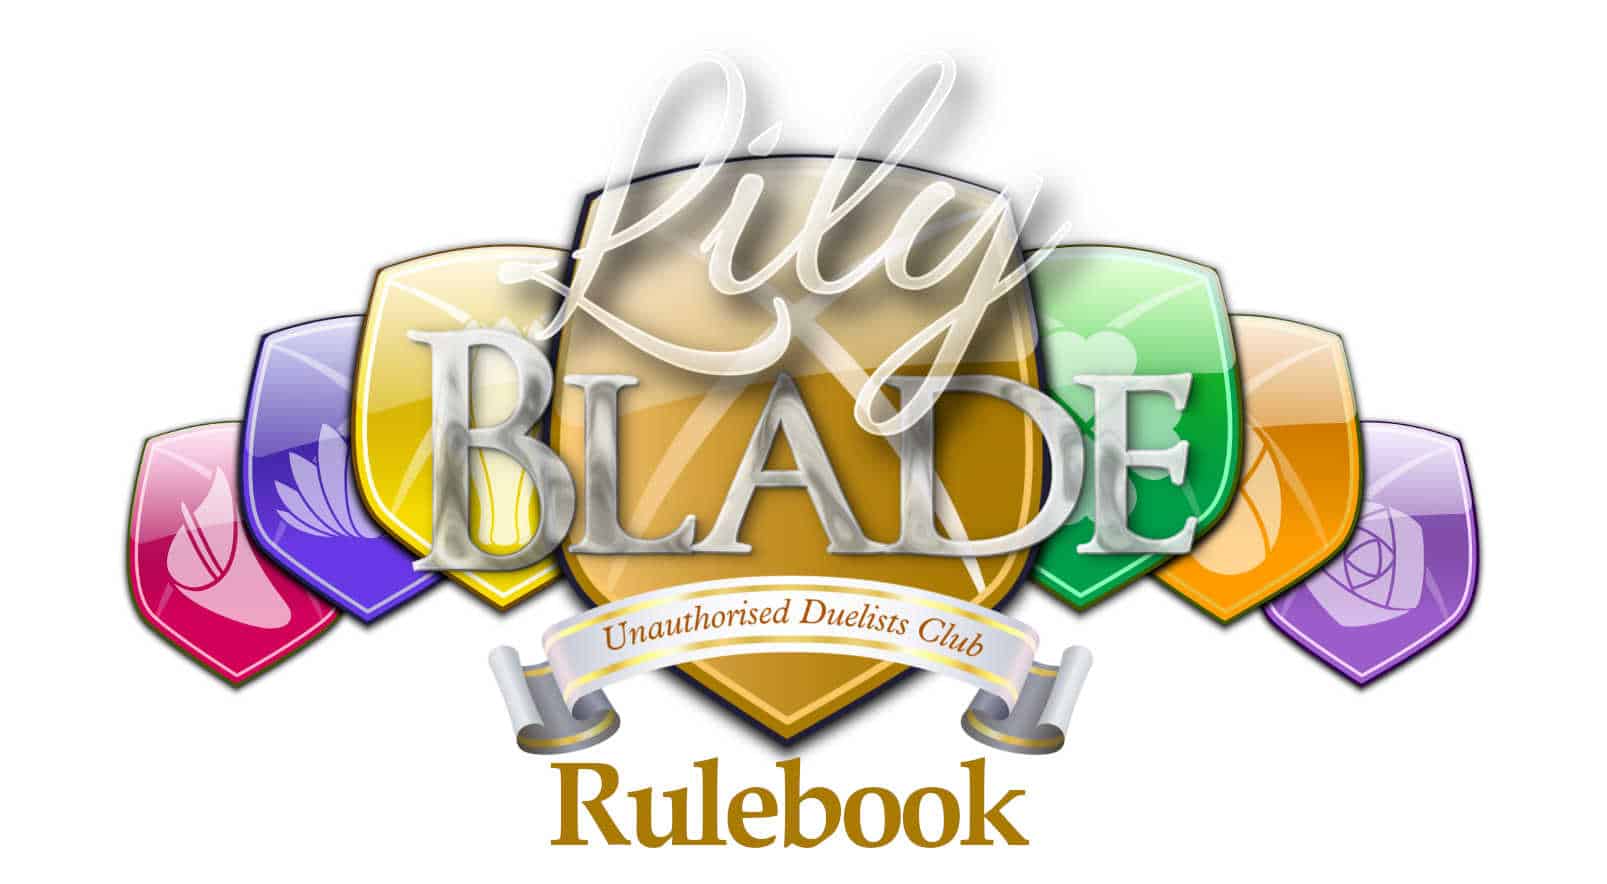 Lily X Blade rulebook title